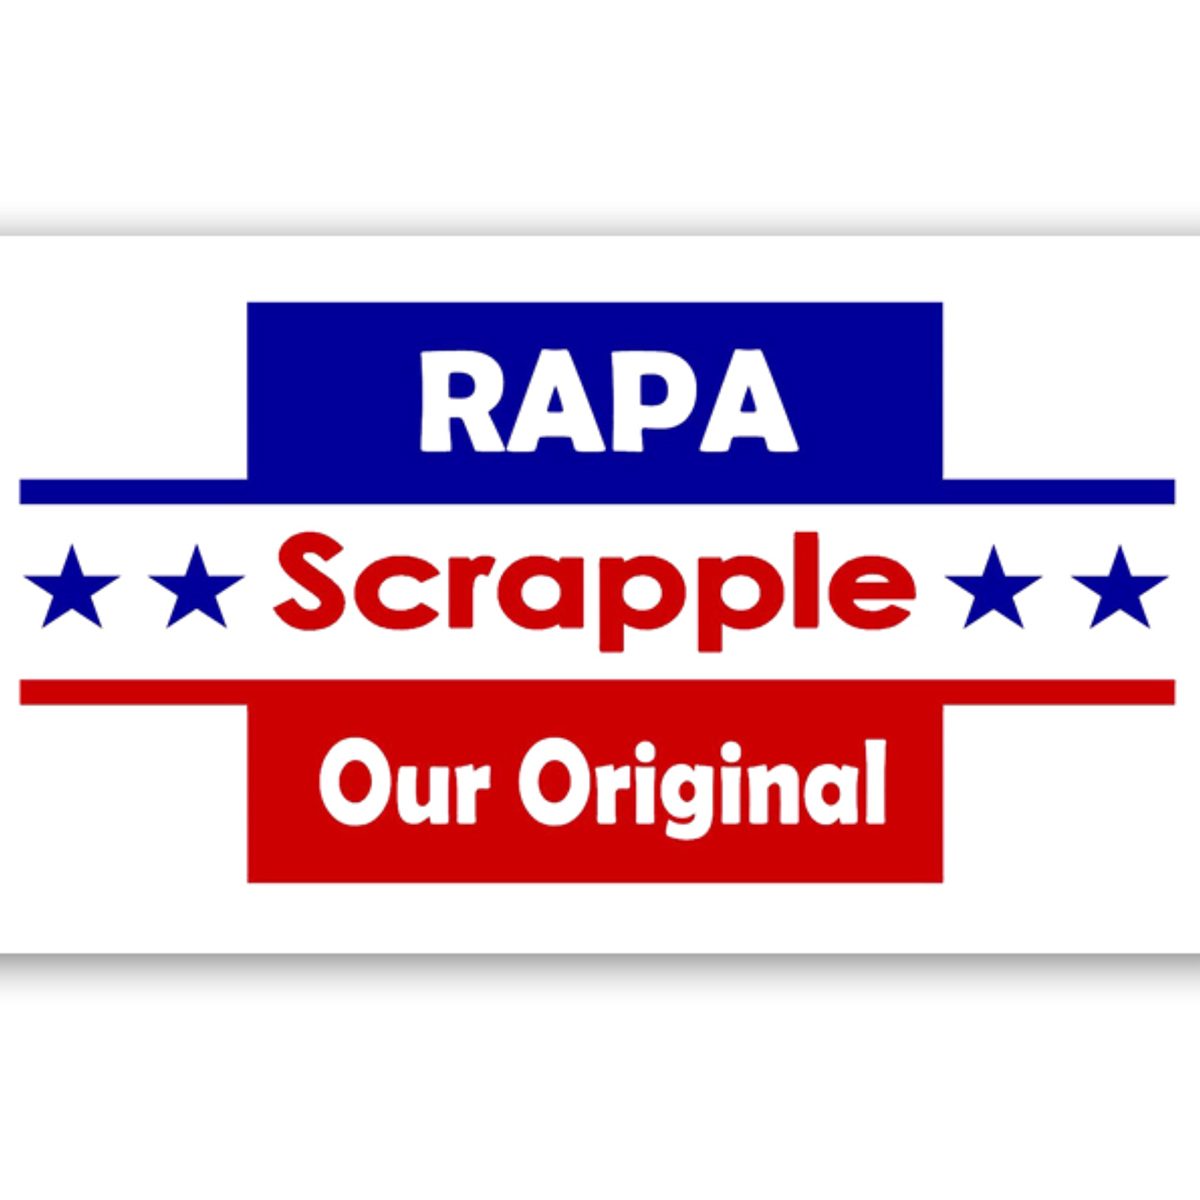 <p class=""><strong><a class="SWhtmlLink" href="https://www.rapascrapple.com/%20" rel="noopener">Rapa Scrapple</a>, Bridgeville</strong></p> <p>Anyone from Philadelphia has a scrapple obsession, but Delaware is so serious about the meat that they've hosted an Apple Scrapple festival for 25 years and counting! The most popular brand of scrapple was invented by two brothers, and the company hasn't changed the recipes since the 1920s.</p>